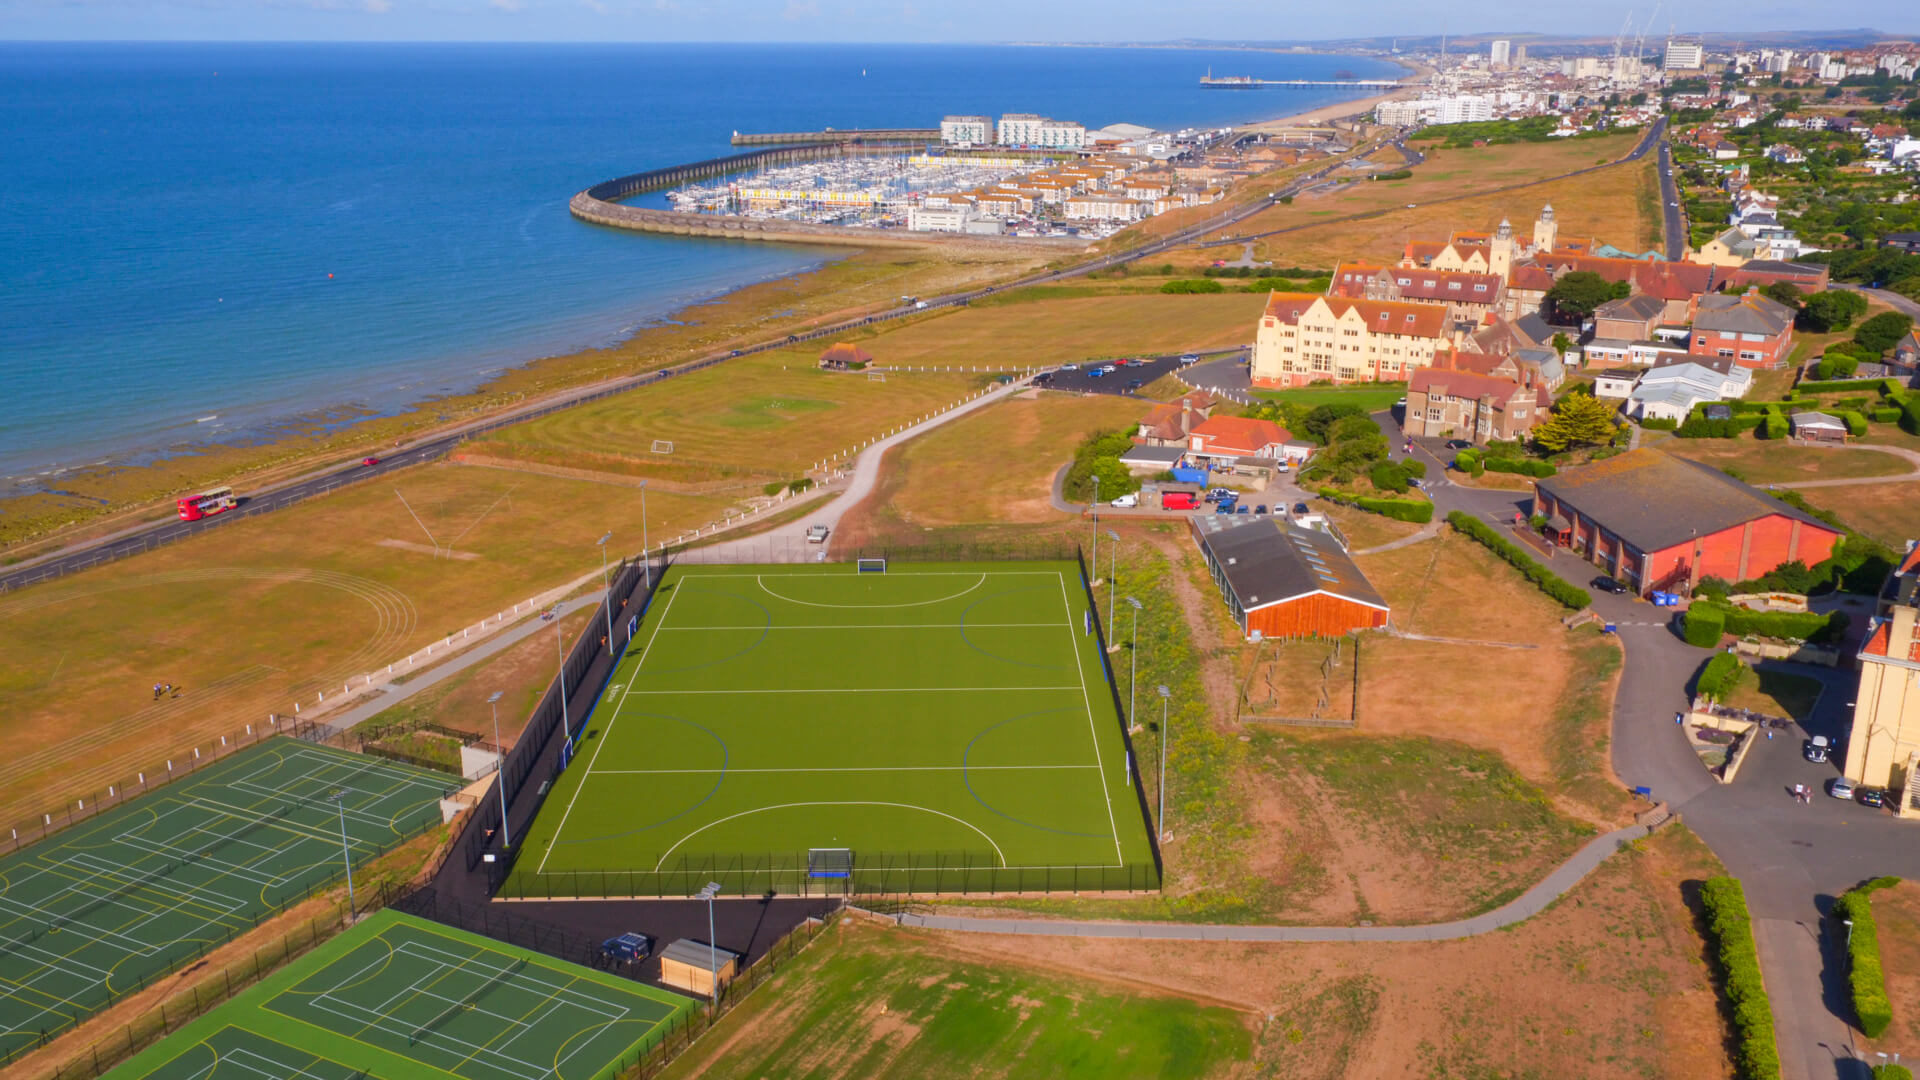 Roedean School sports facilities and footpaths